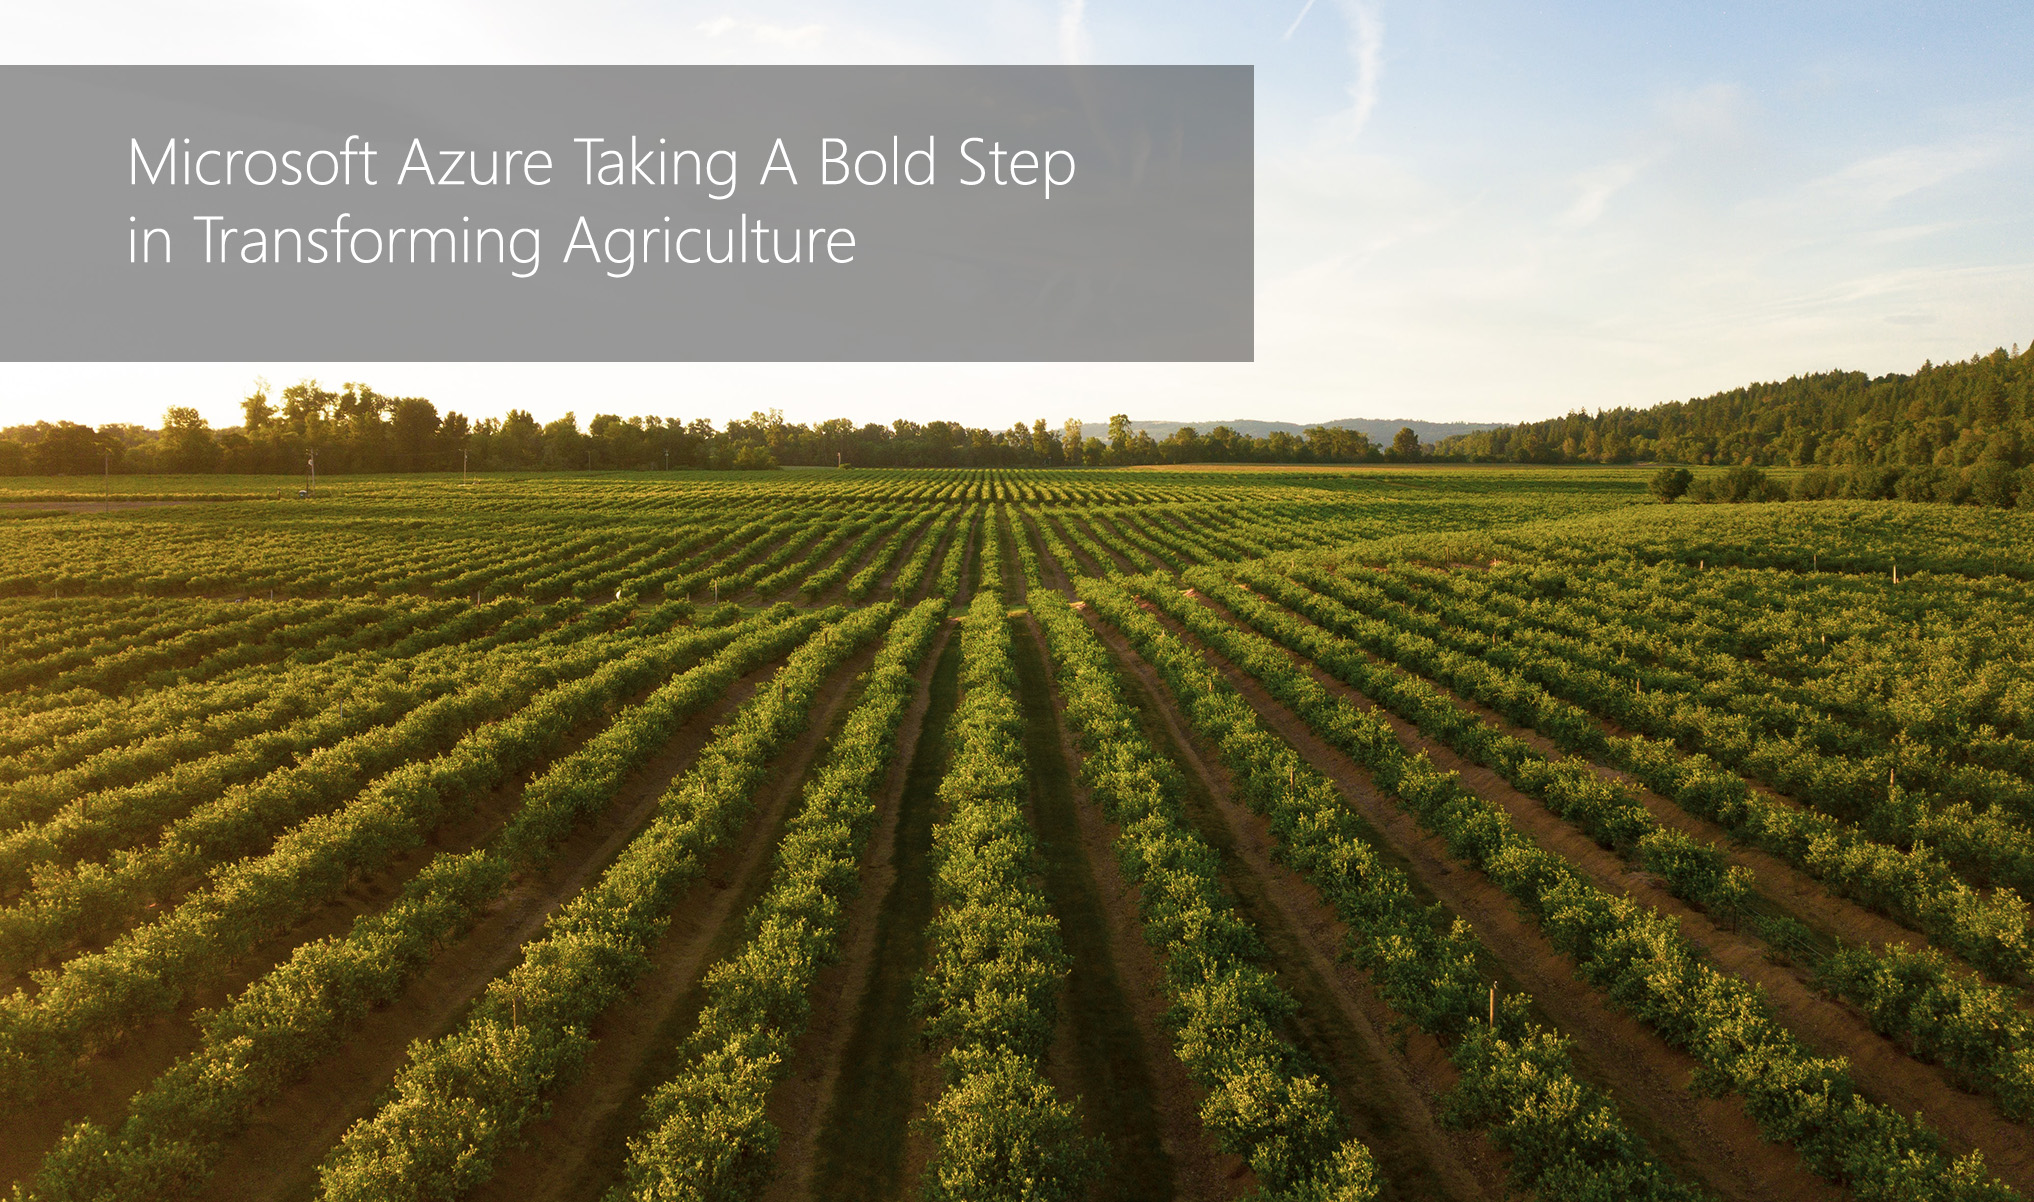 tmc-blog-microsoft-azure-taking-a-bold-step-in-transforming-agriculture